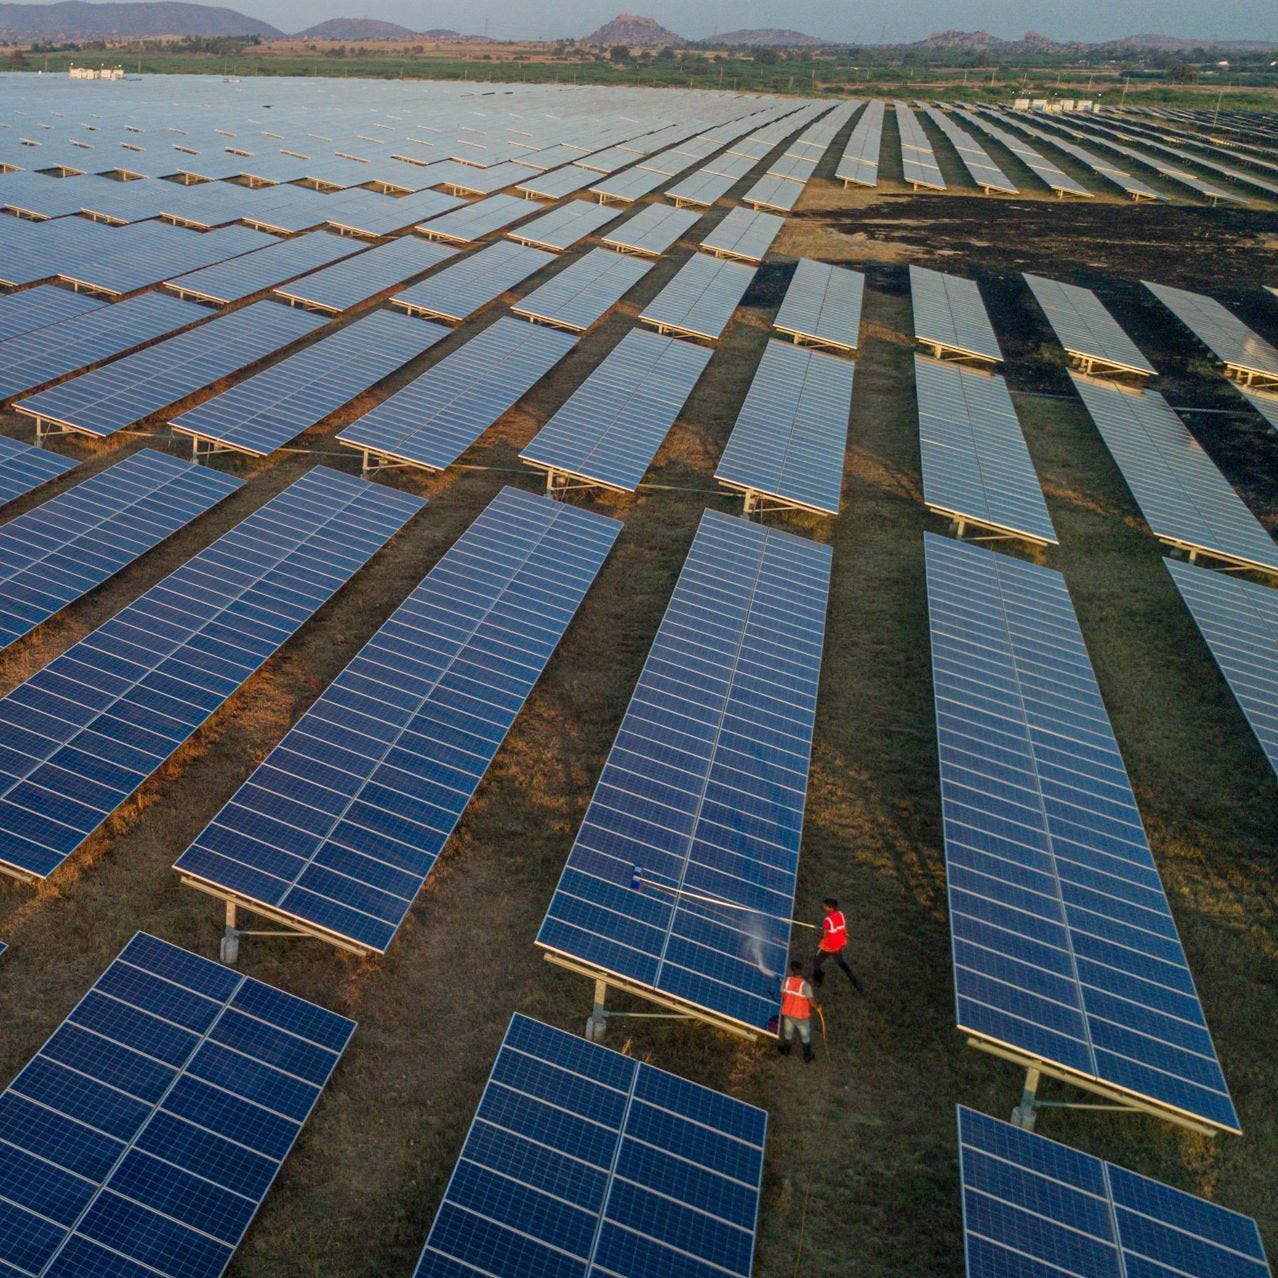 Solar panels in Pavagada, India, in 2022. India is boosting its renewable-energy capacity while also burning more coal.